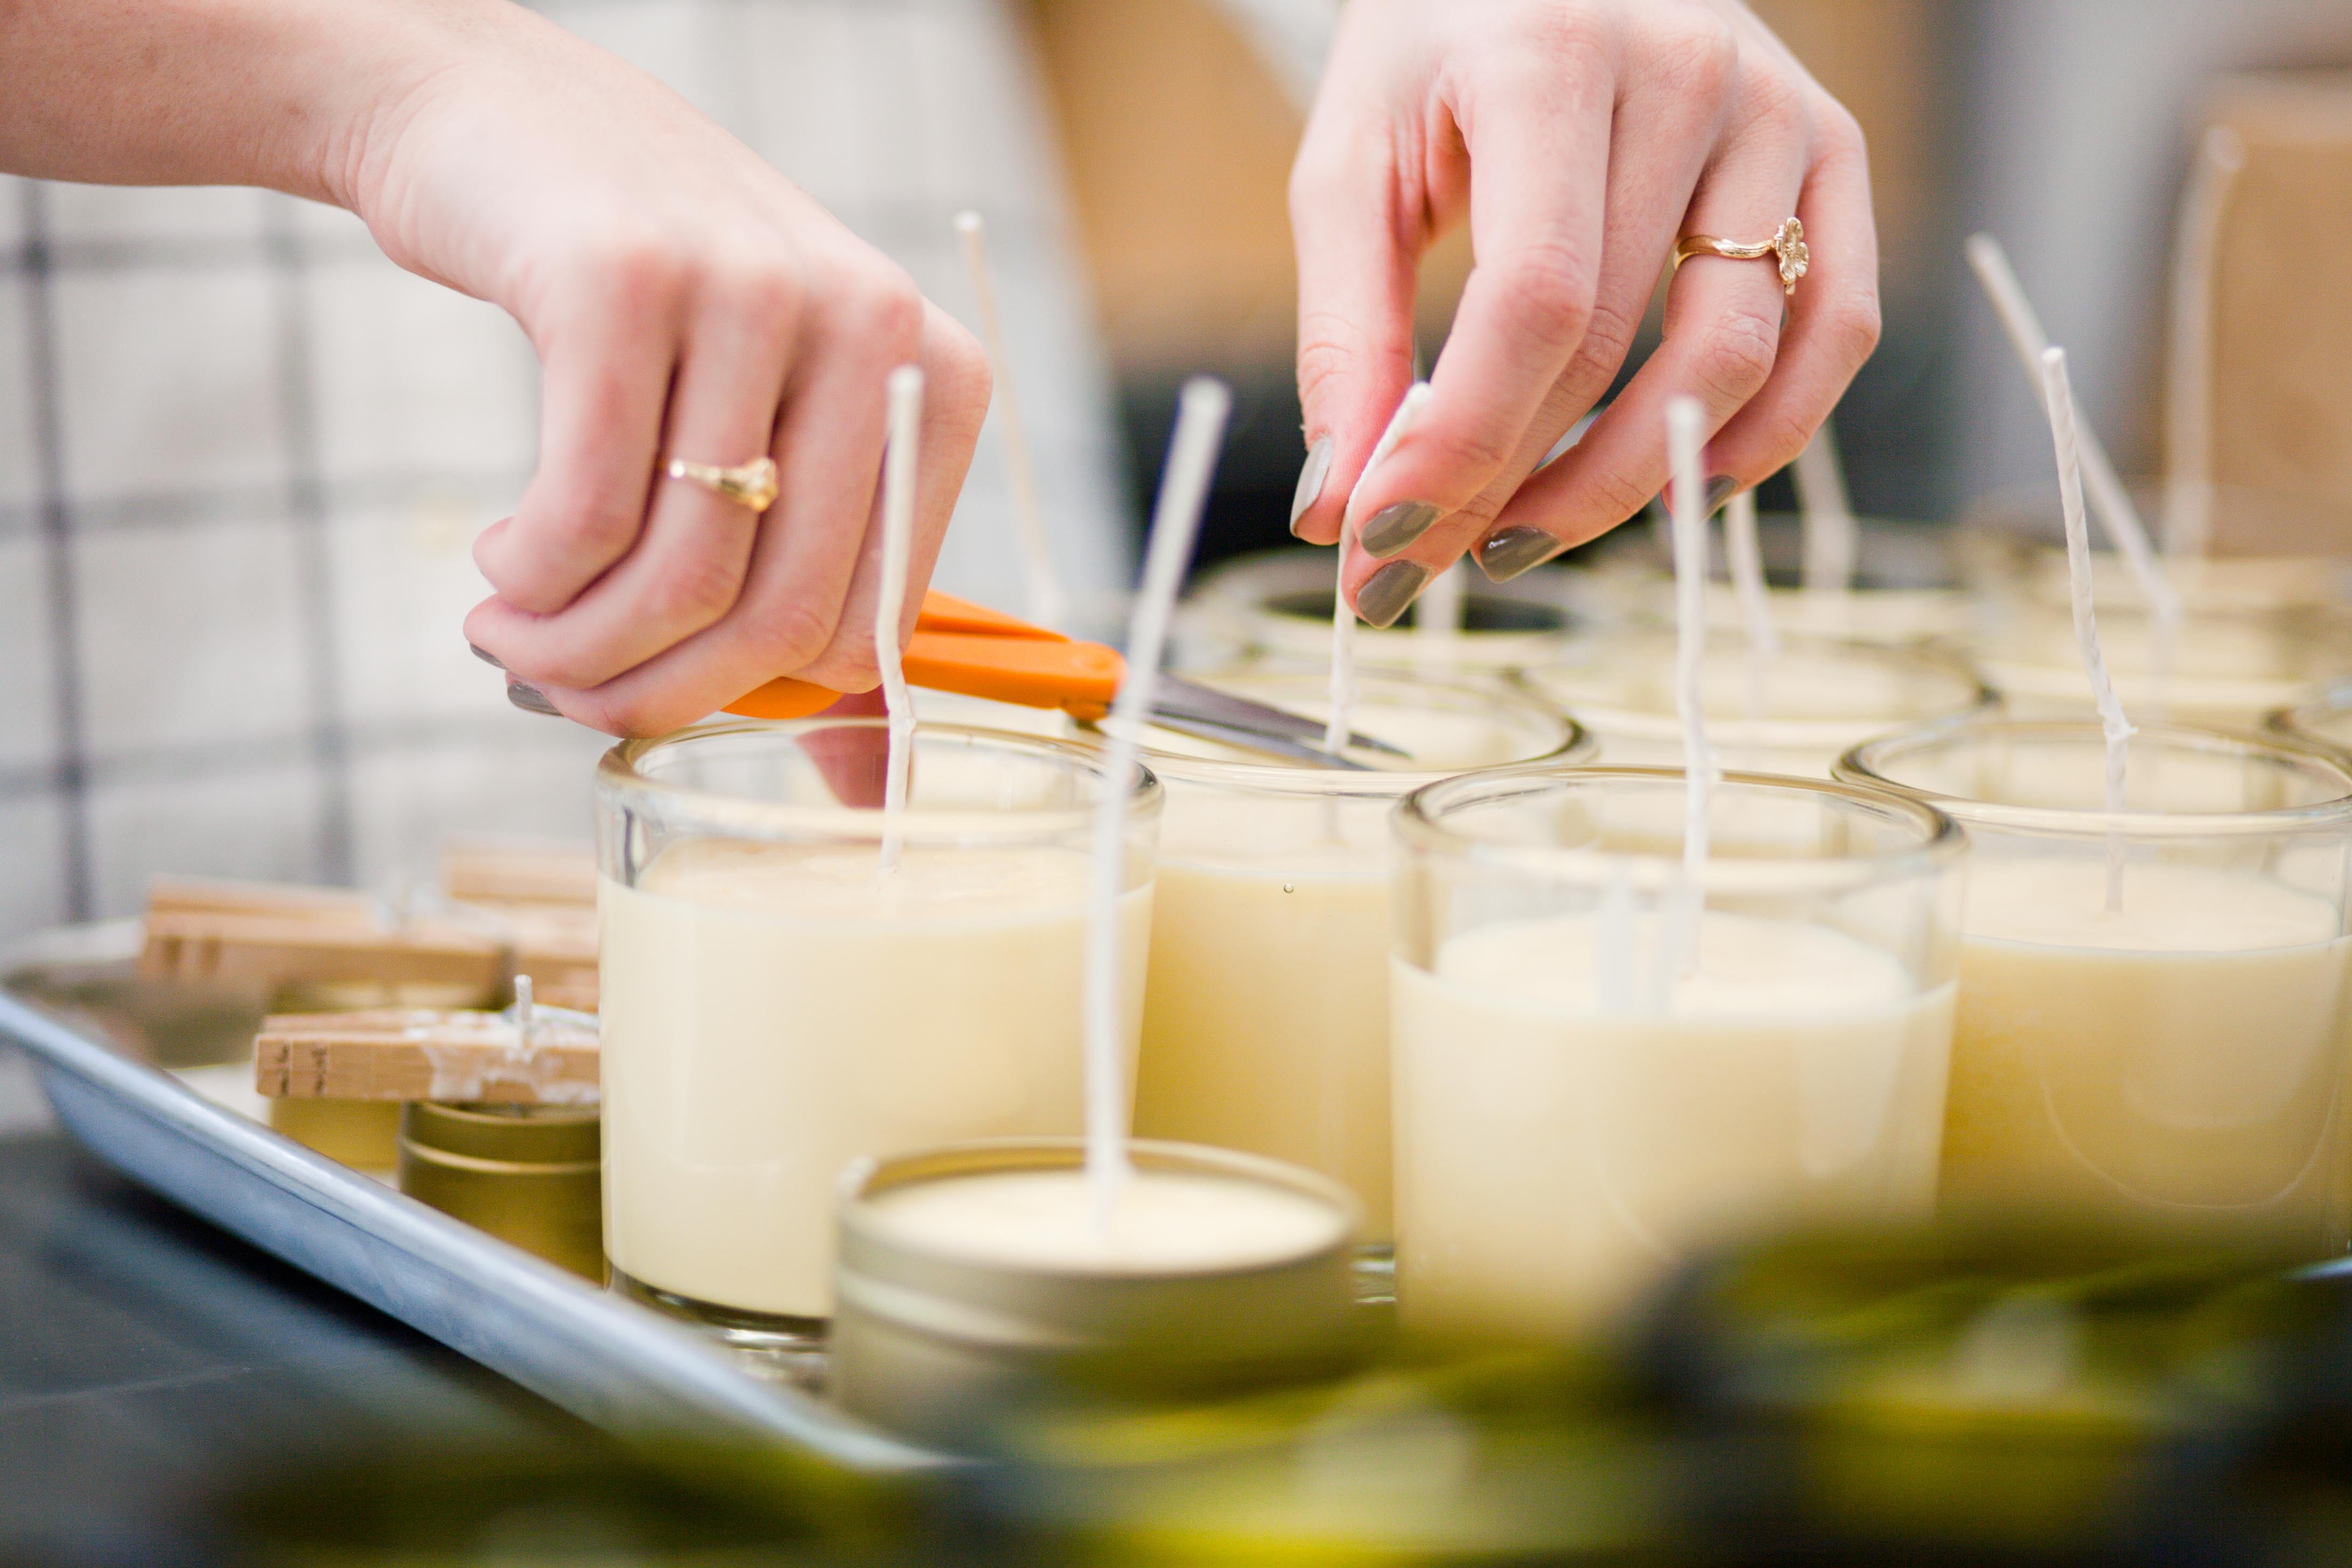 Sunday, Sept. 10 - DIY Soy Candle Making Workshop with Essential